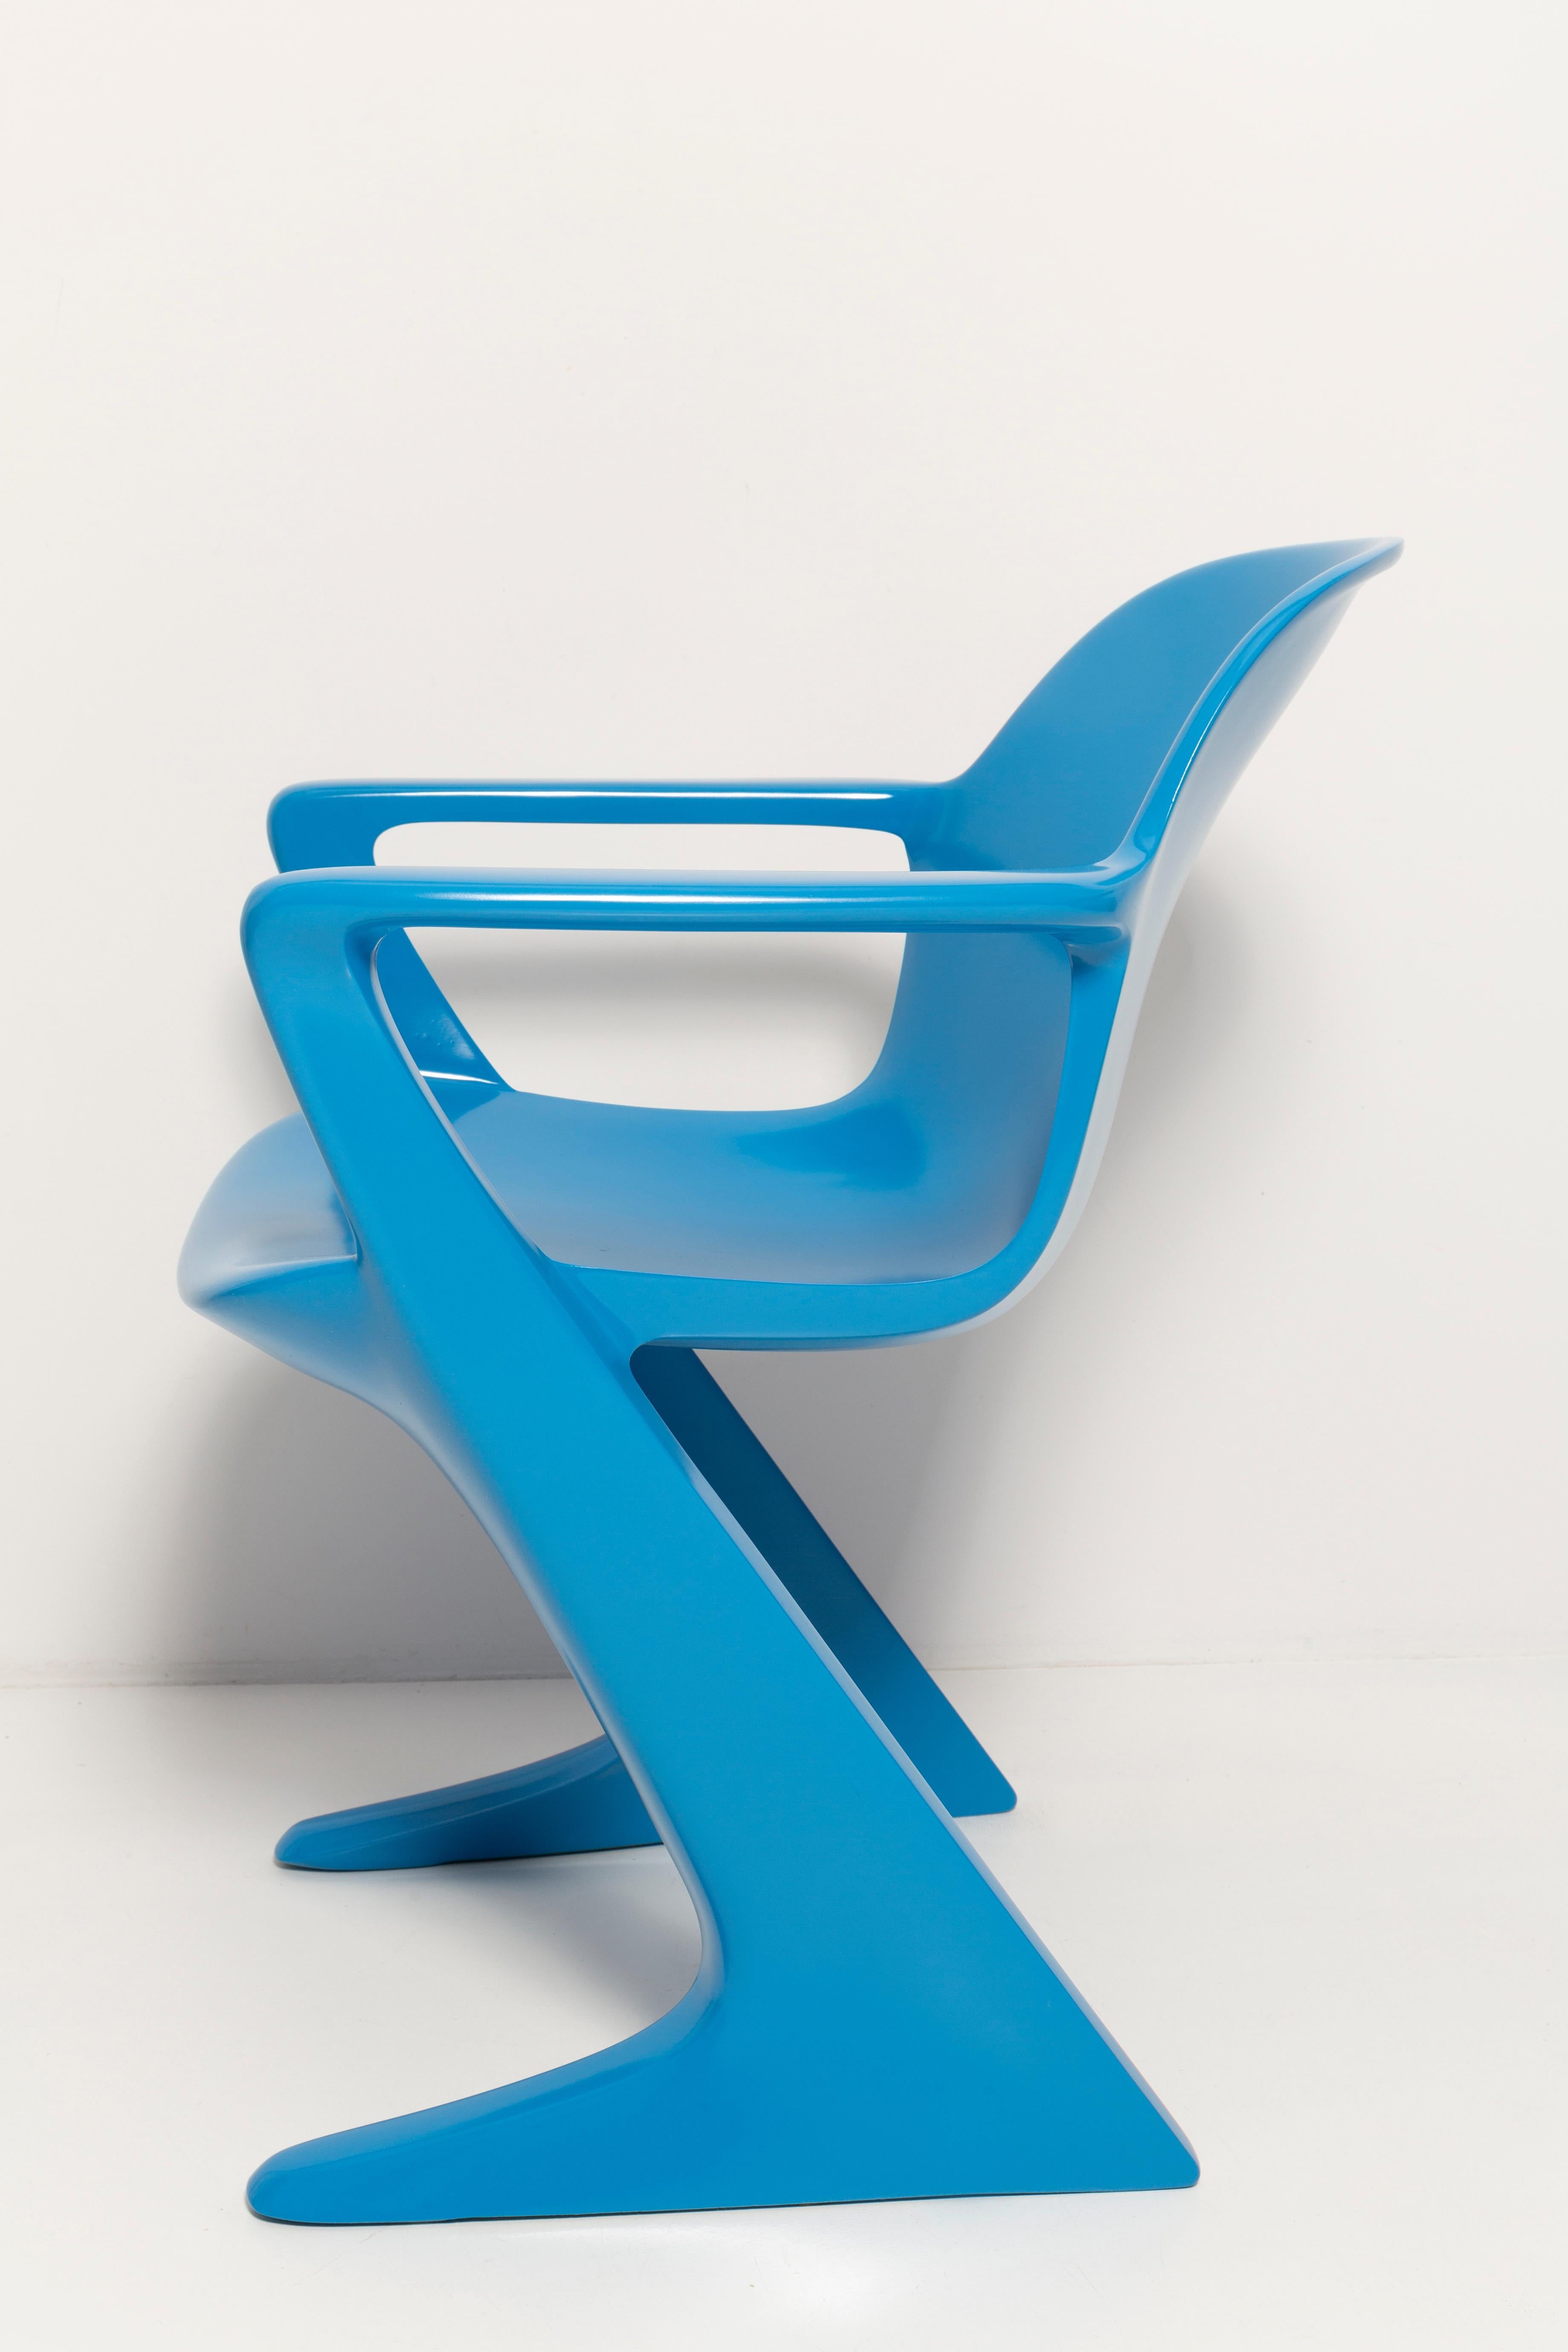 Set of Six Blue Kangaroo Chairs Designed by Ernst Moeckl, Germany, 1960s For Sale 2